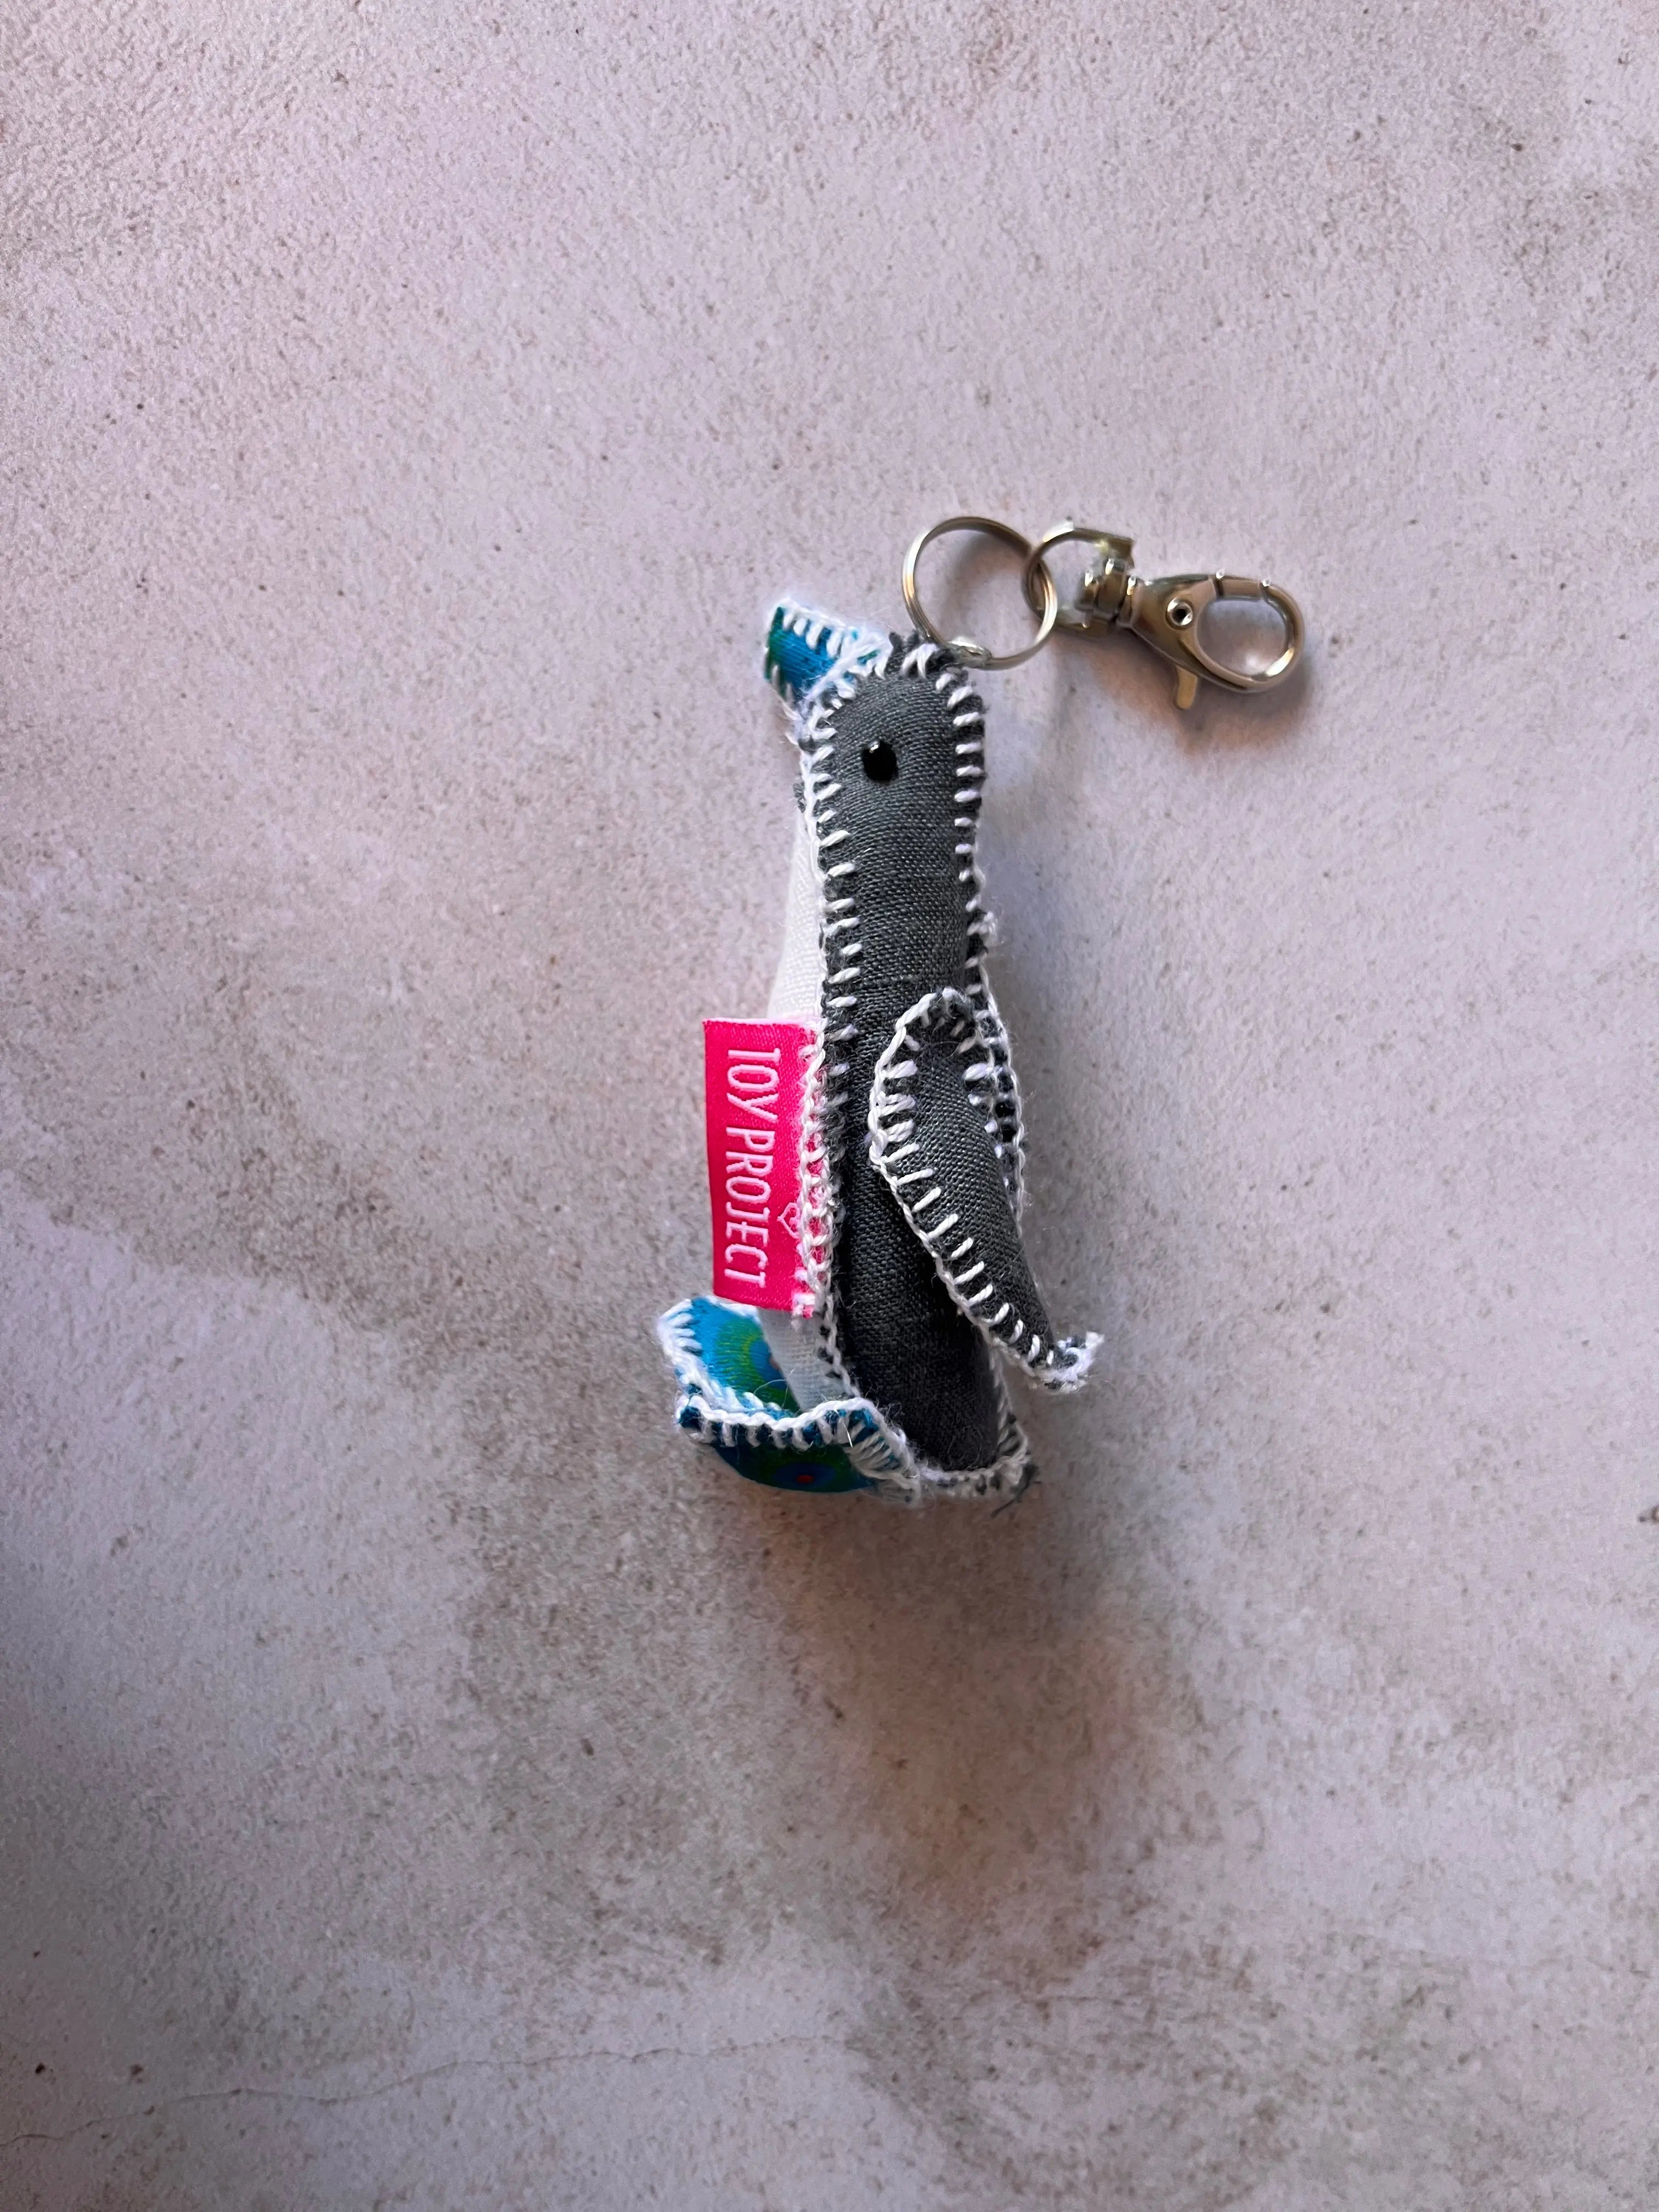 Handmade Bag Charms and Keyrings Toy Project